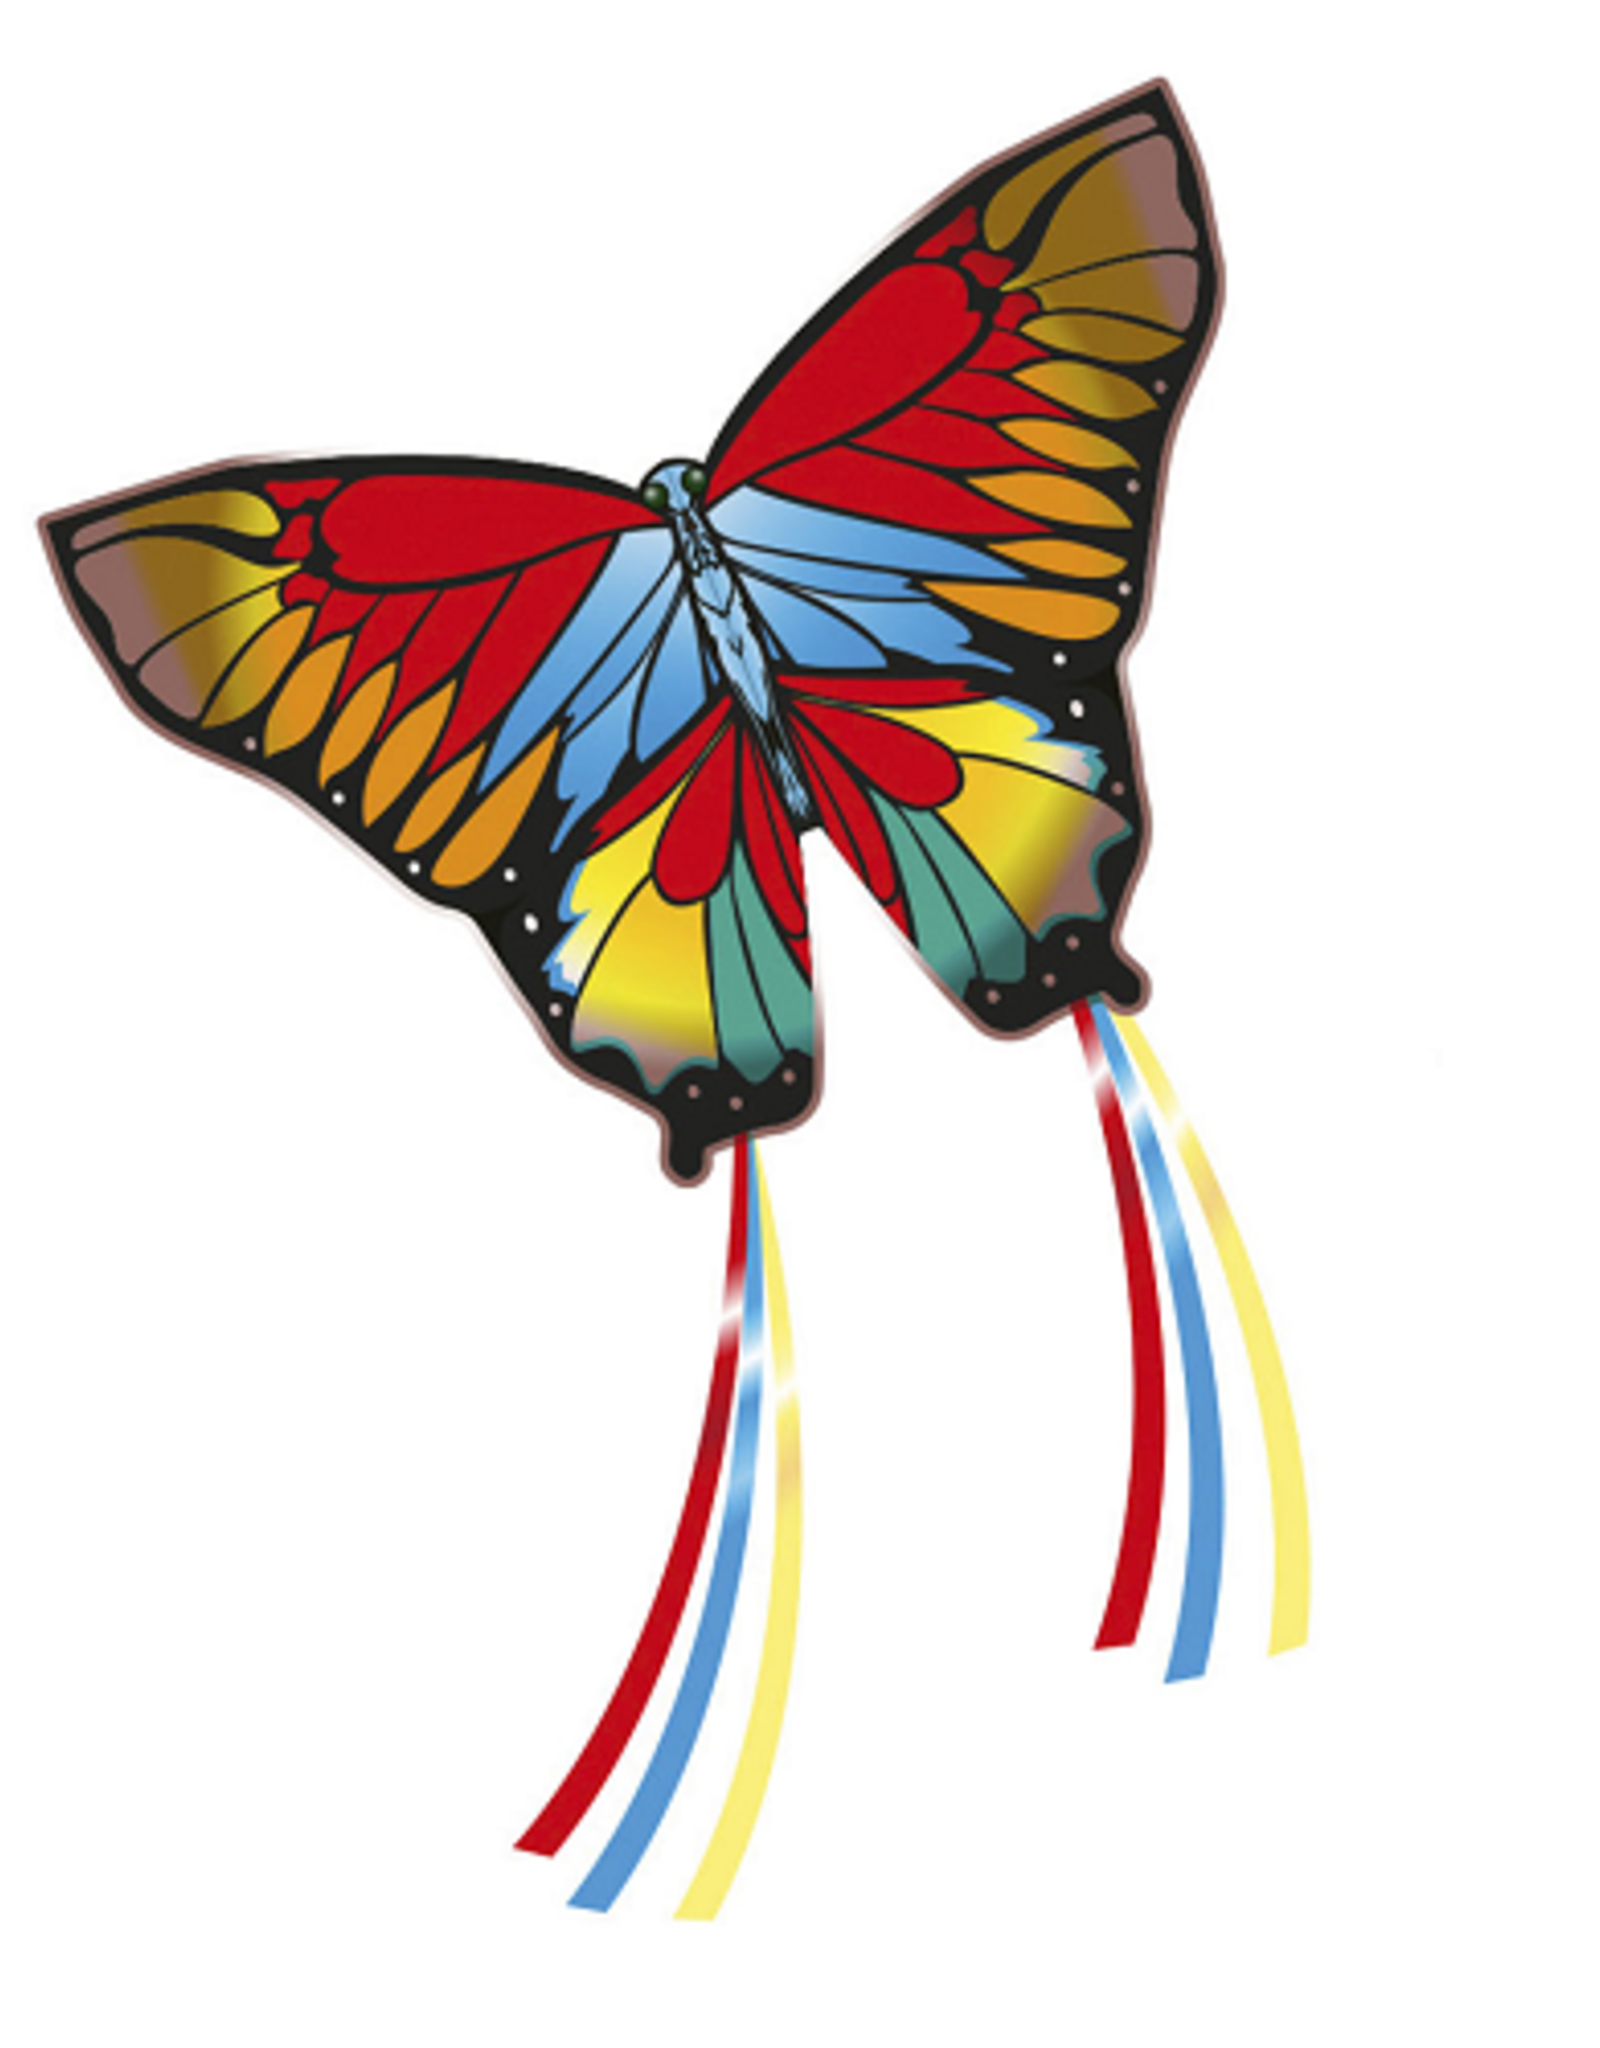 Toysmith Pop-Up! Kites - Red Butterfly